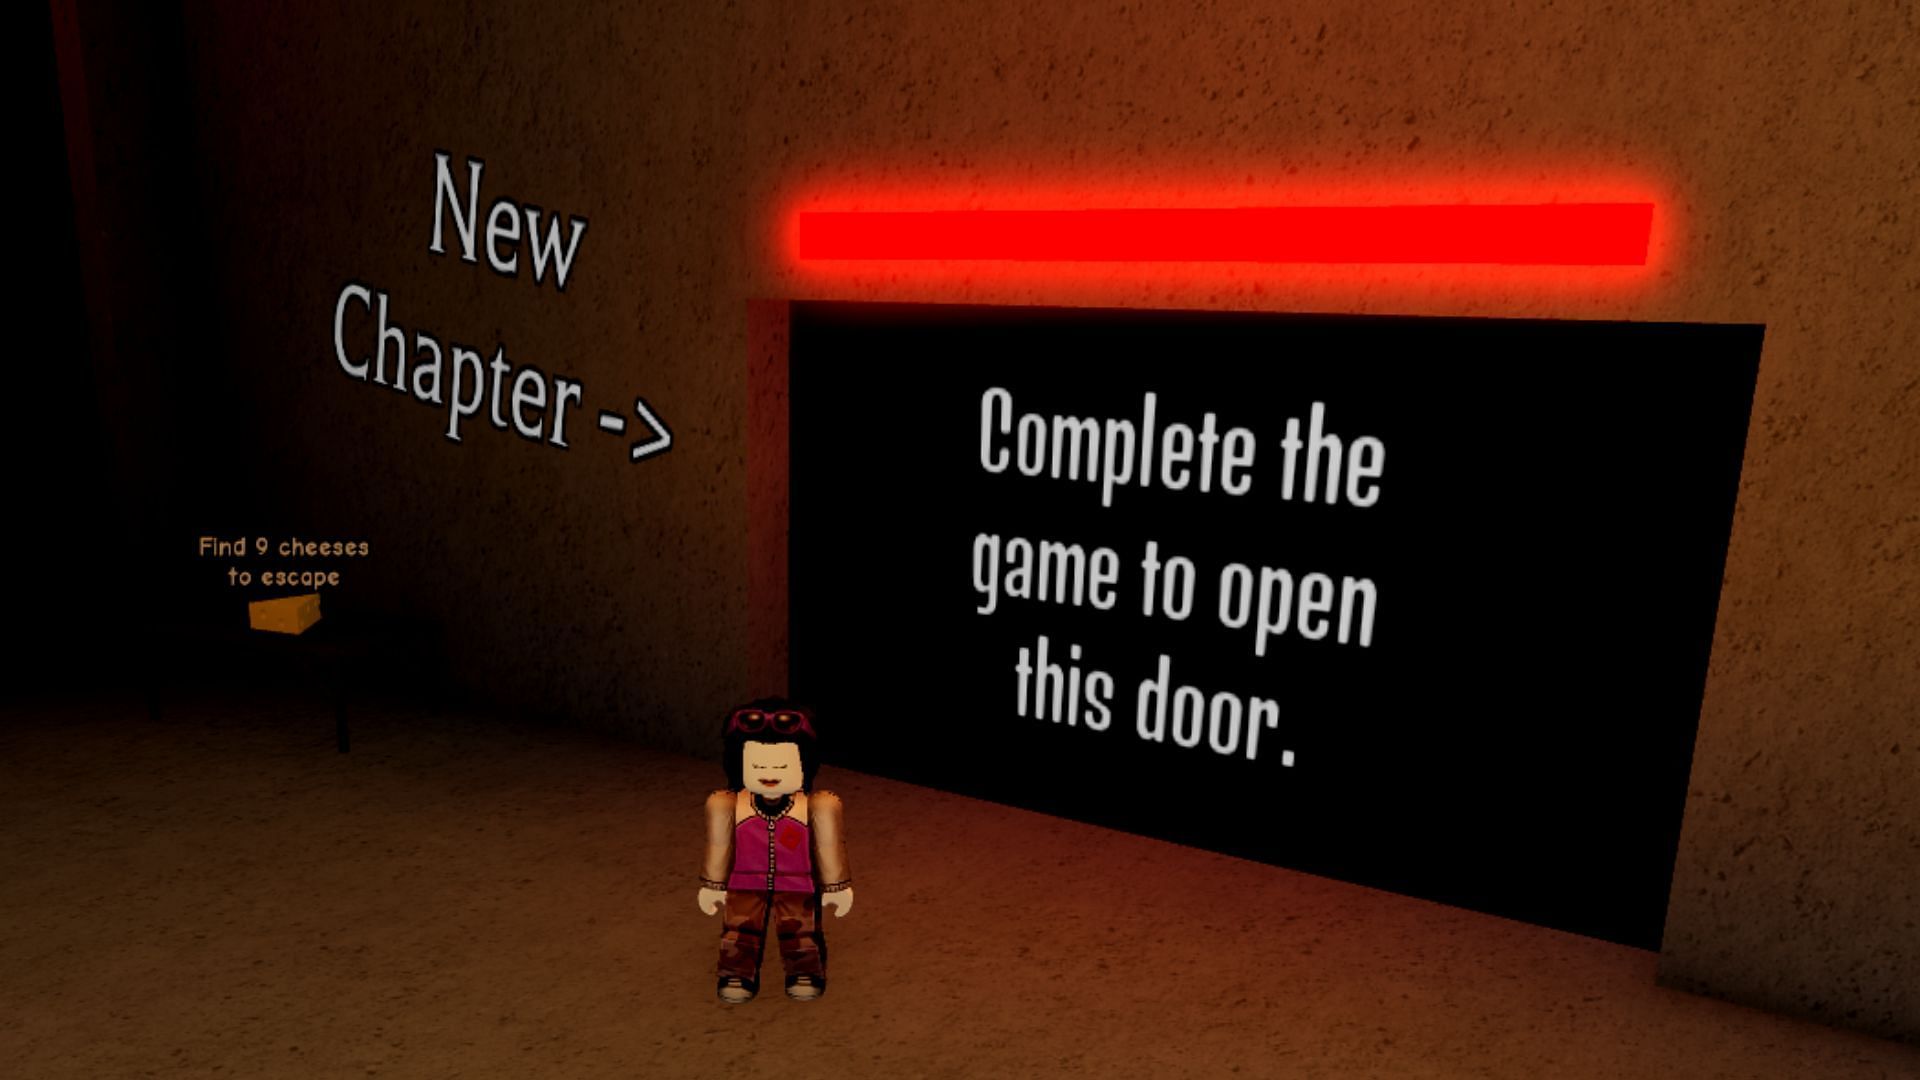 Does Cheese Escape have any codes? (Image via Roblox)